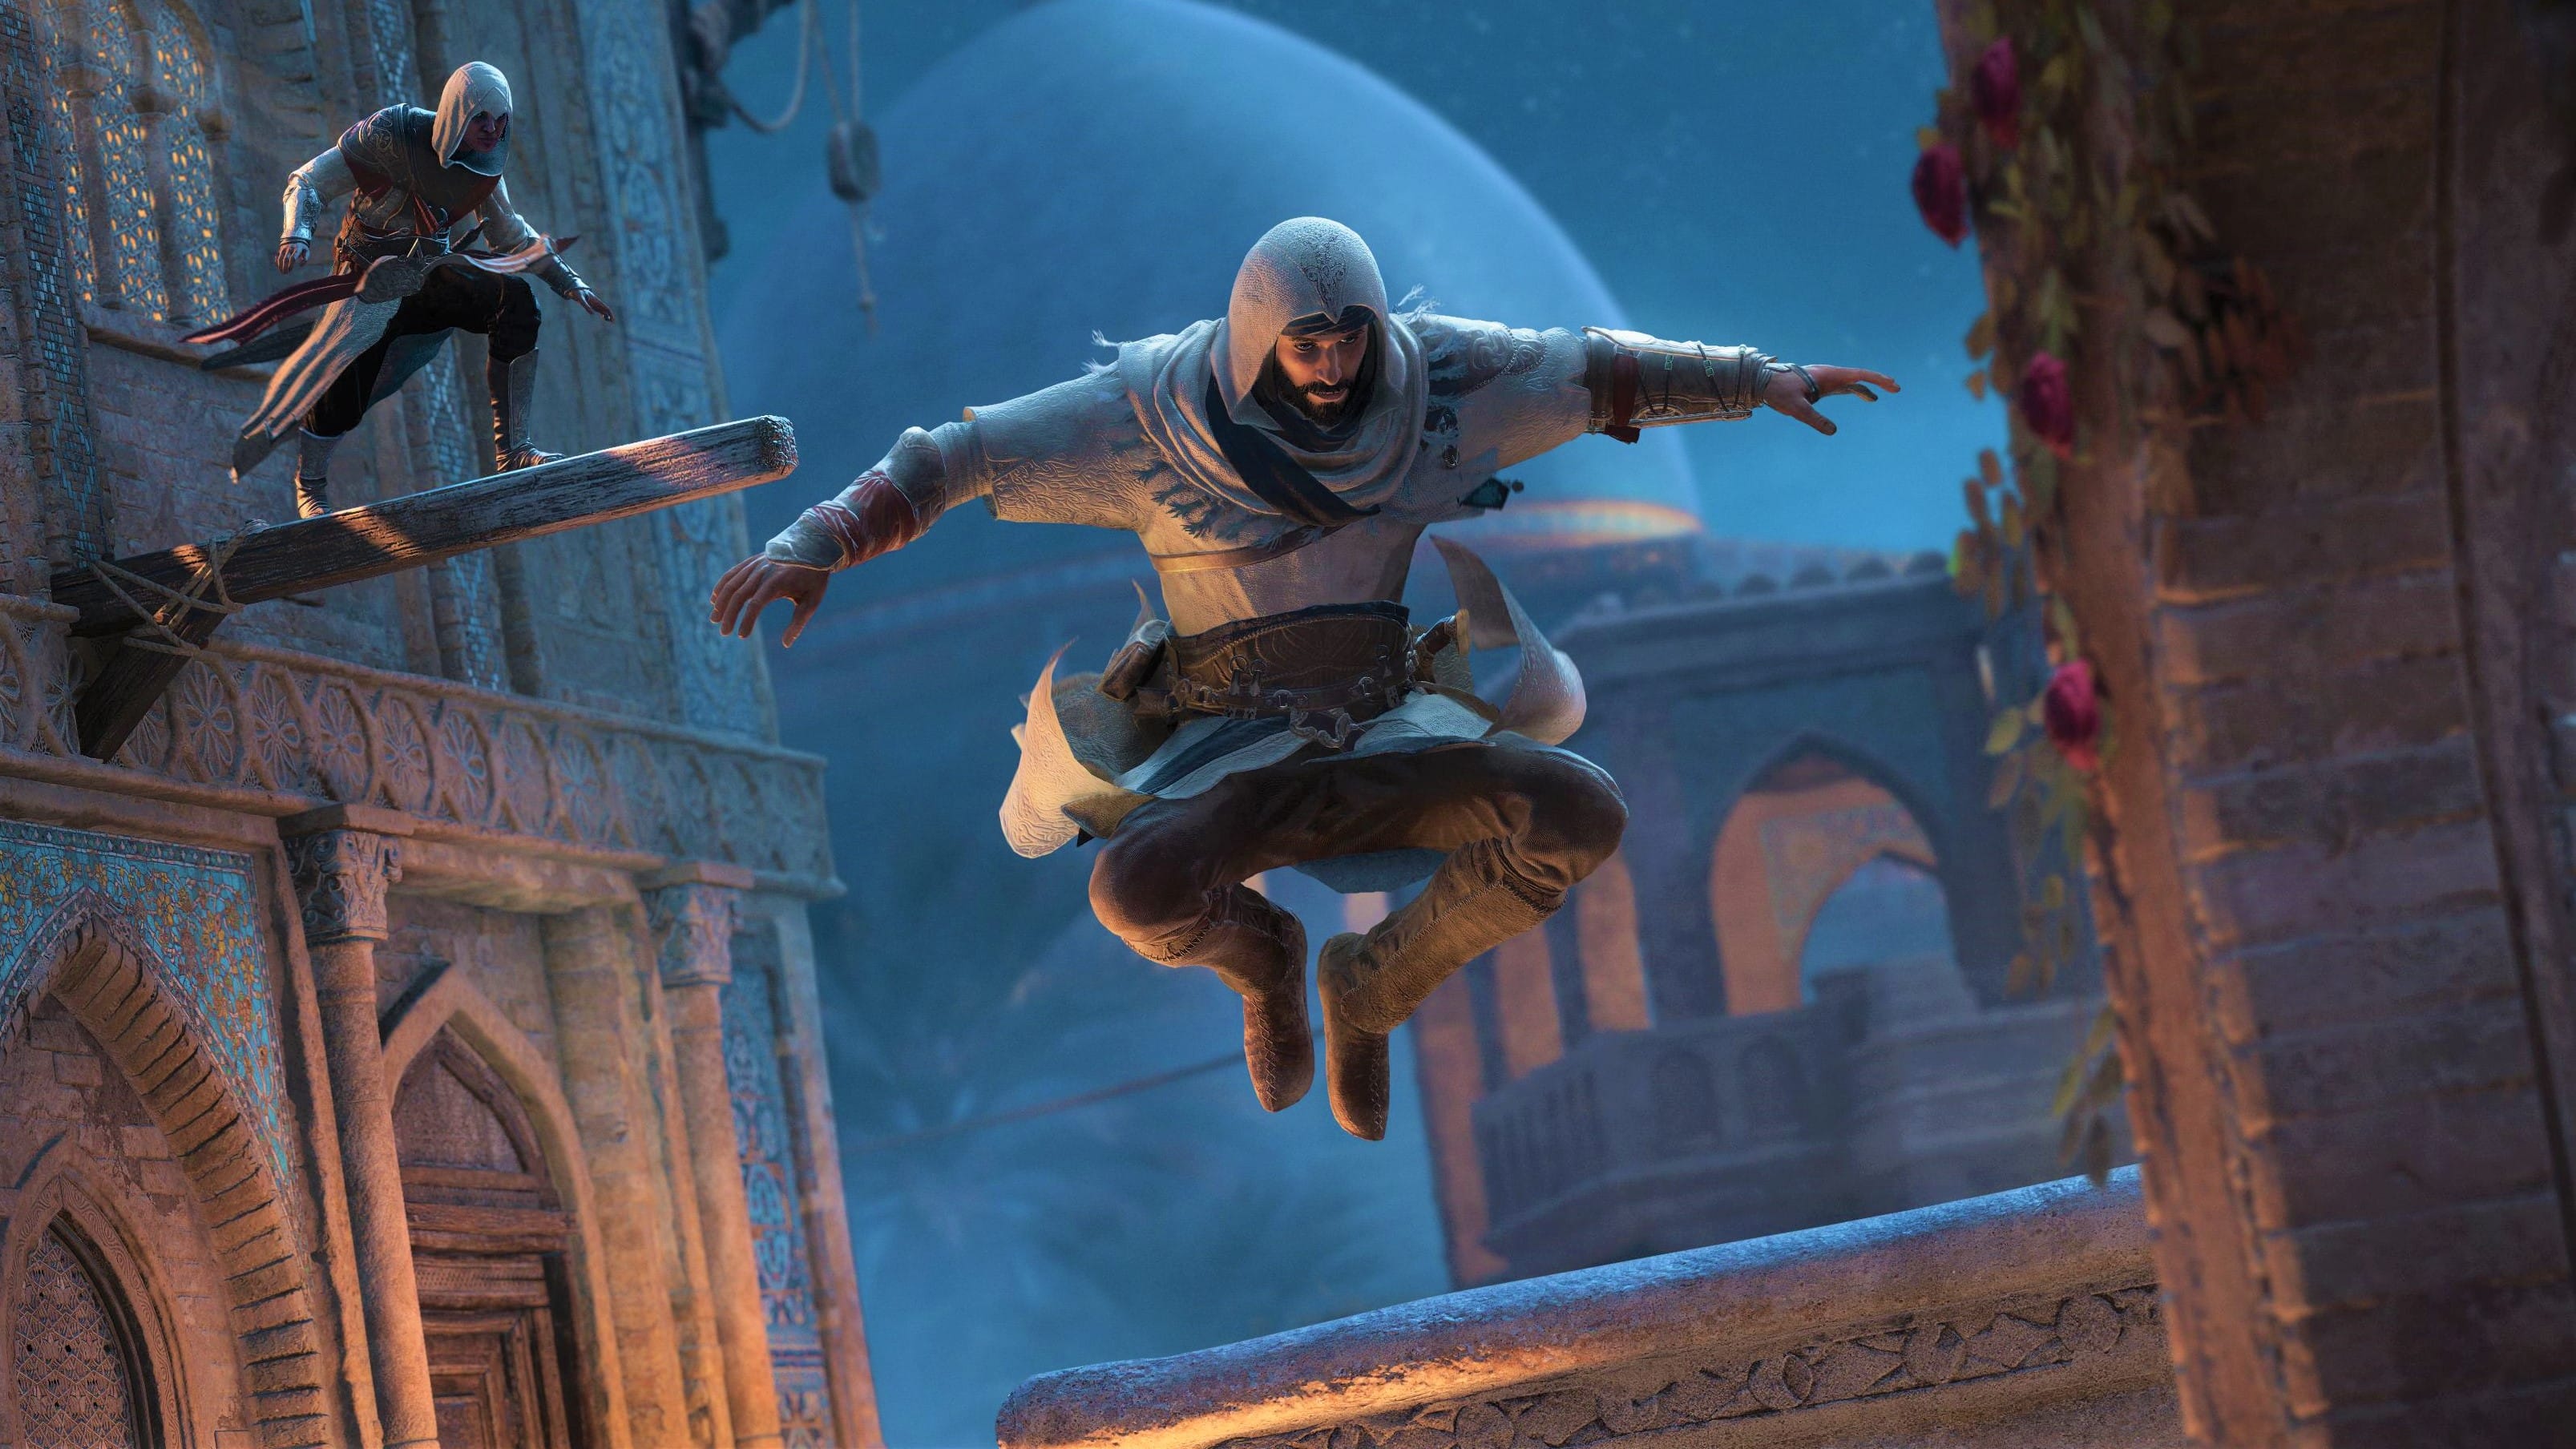 Assassin's Creed Mirage' is reportedly set for release in spring 2023